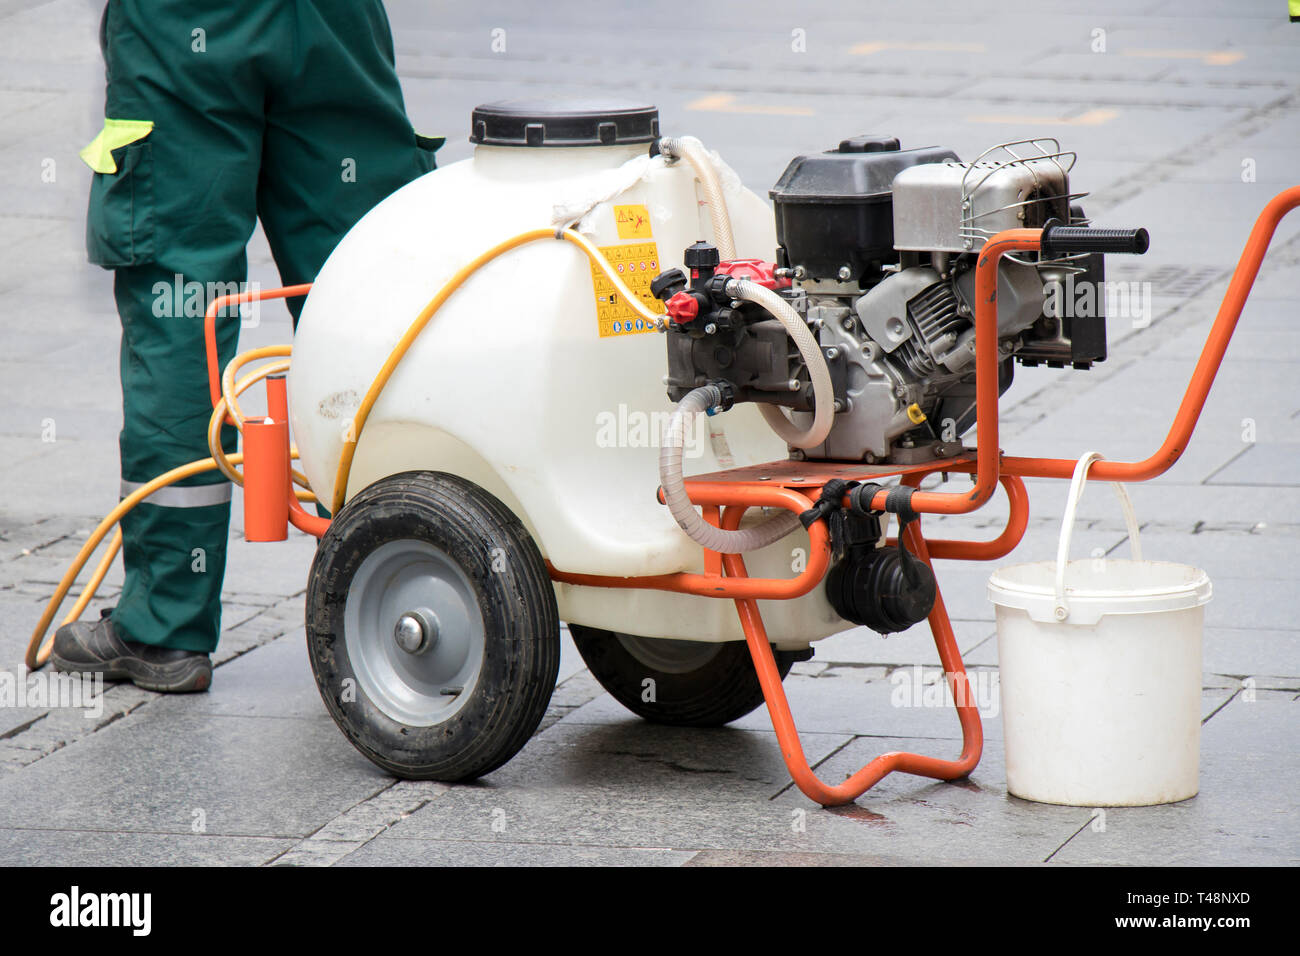 Watercart on wheels, portable watering system on pedestrian street, close up Stock Photo